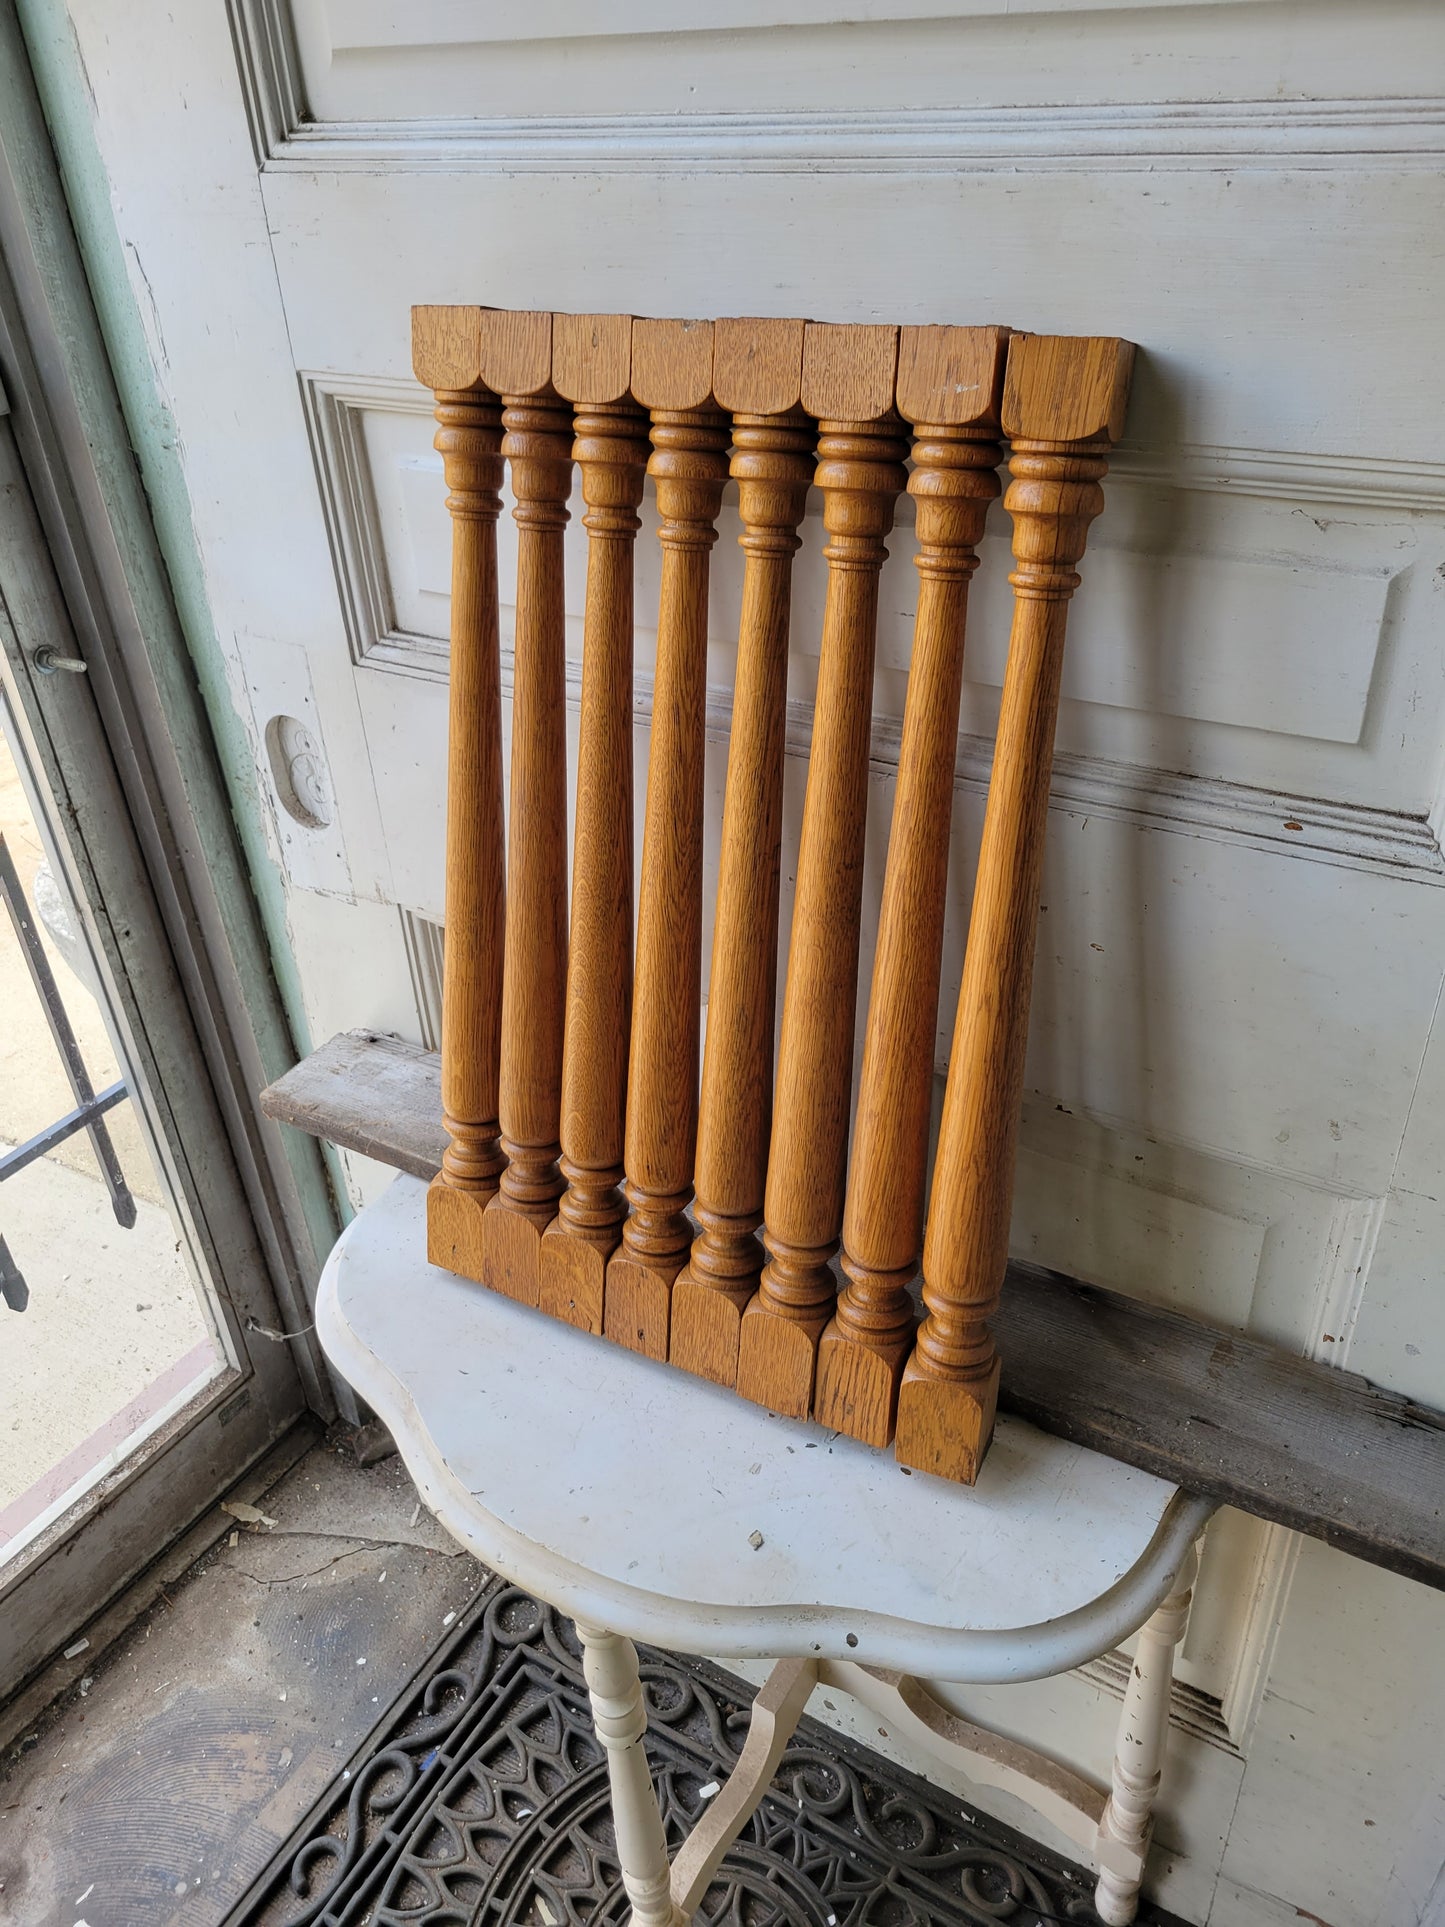 Set of 8 Antique Wood Staircase Spindles, 8 Matching Stair Balusters